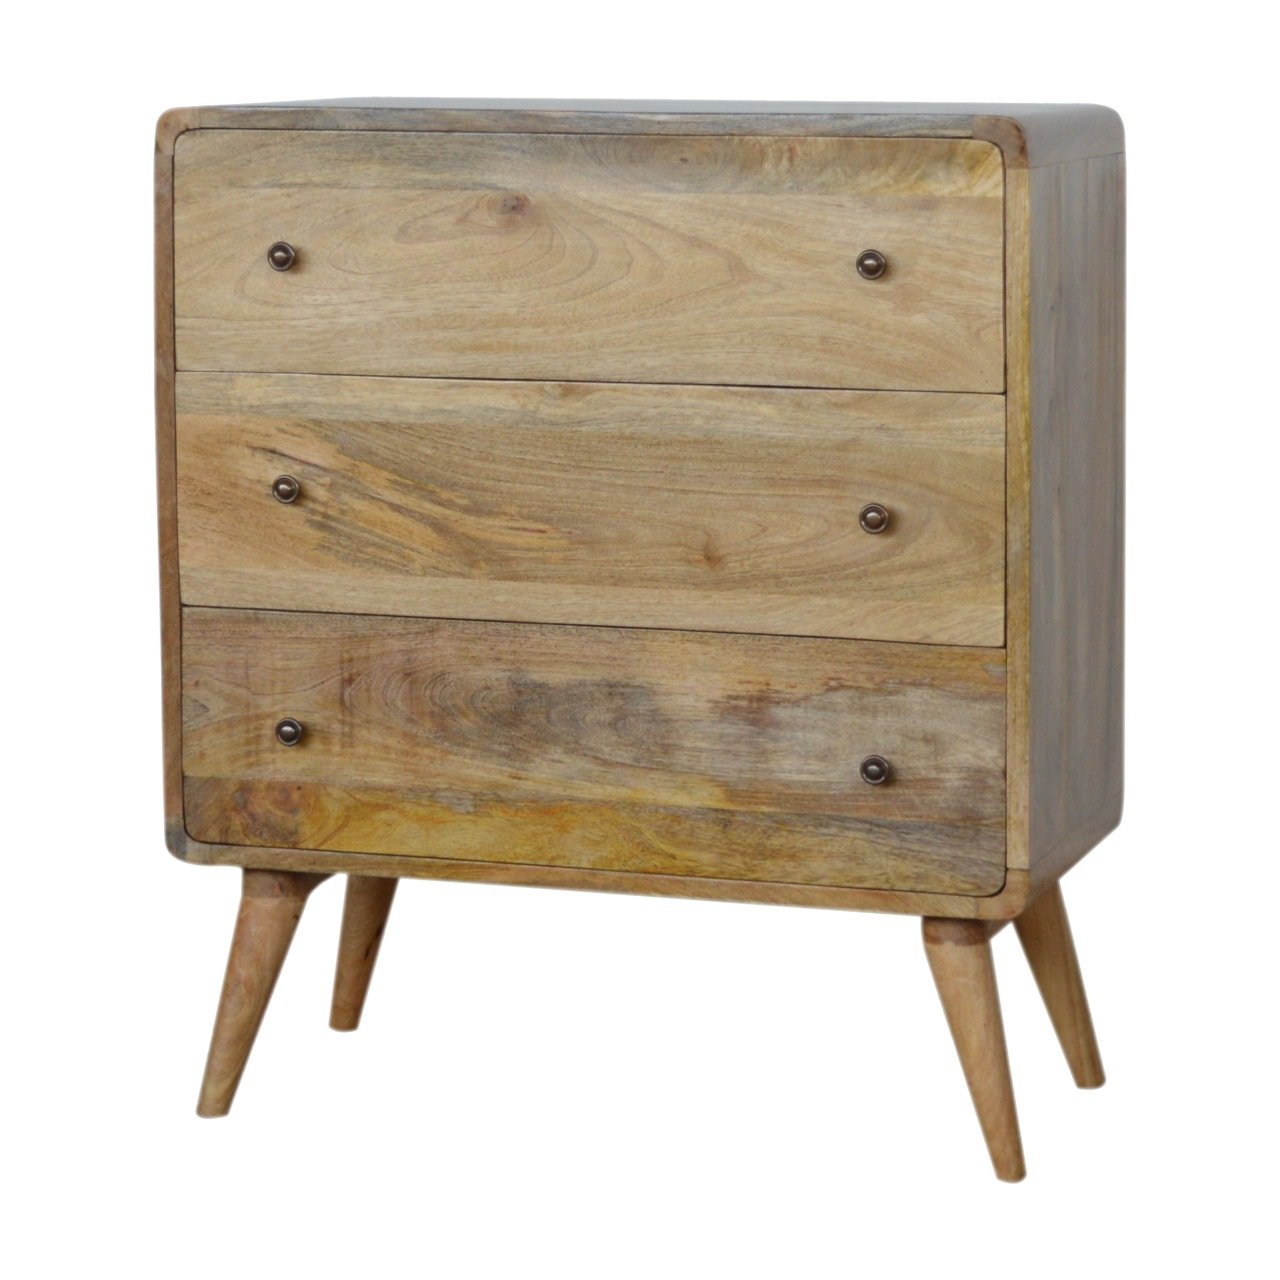 Modal Handmade solid wood chest of 3 drawers in an oak-ish natural finish | malletandplane.com